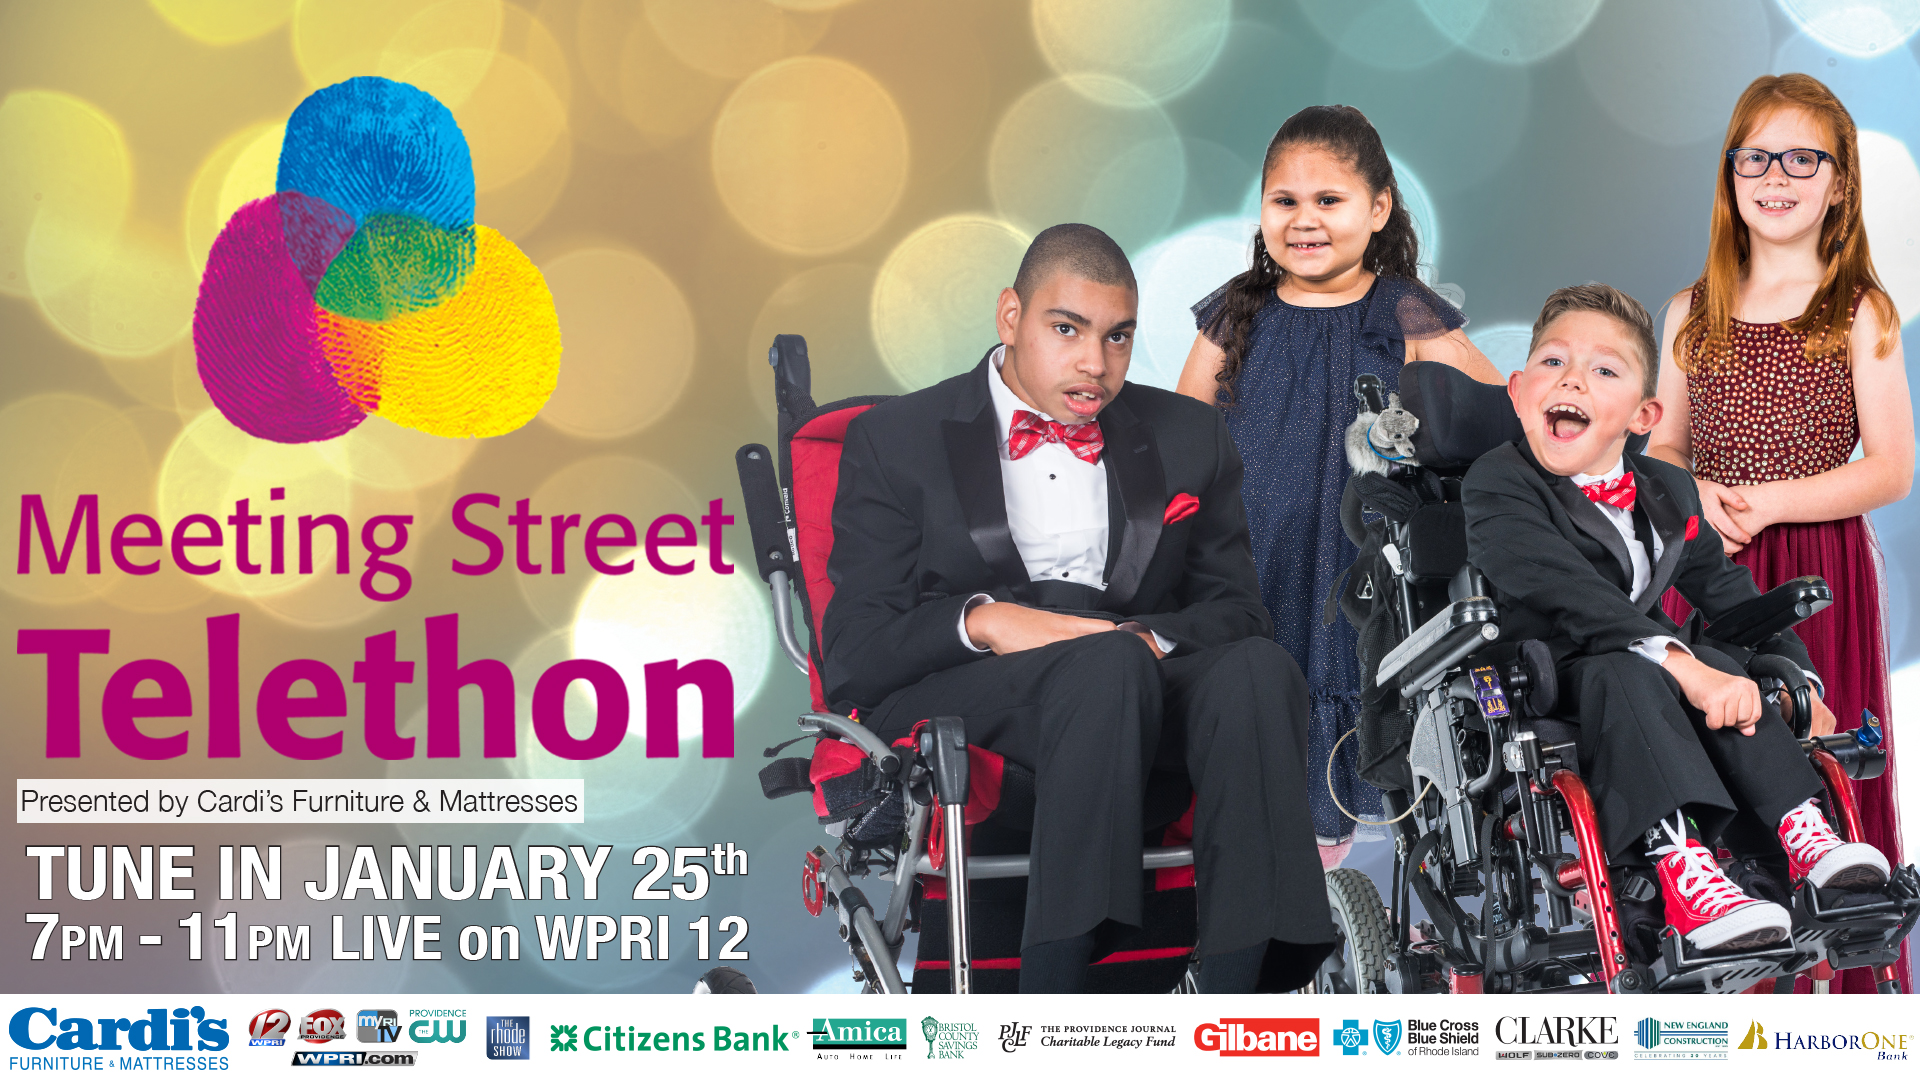 I will be volunteering at the Meeting Street Telethon! I AM LEAH